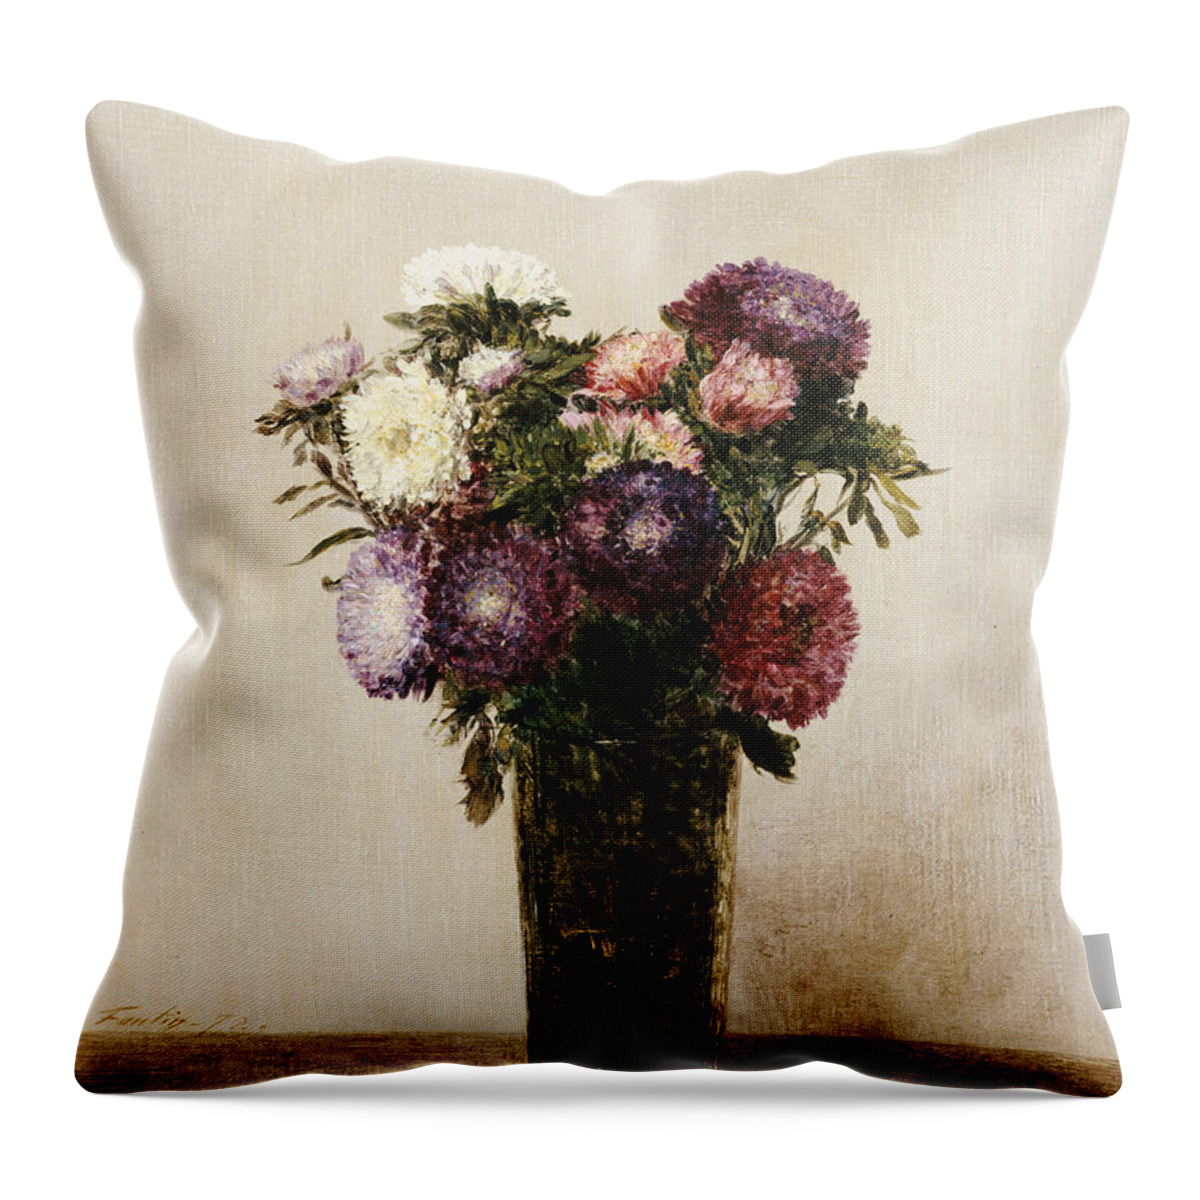 Still-life Throw Pillow featuring the painting Vase of Flowers by gnace Henri Jean Fantin-Latour